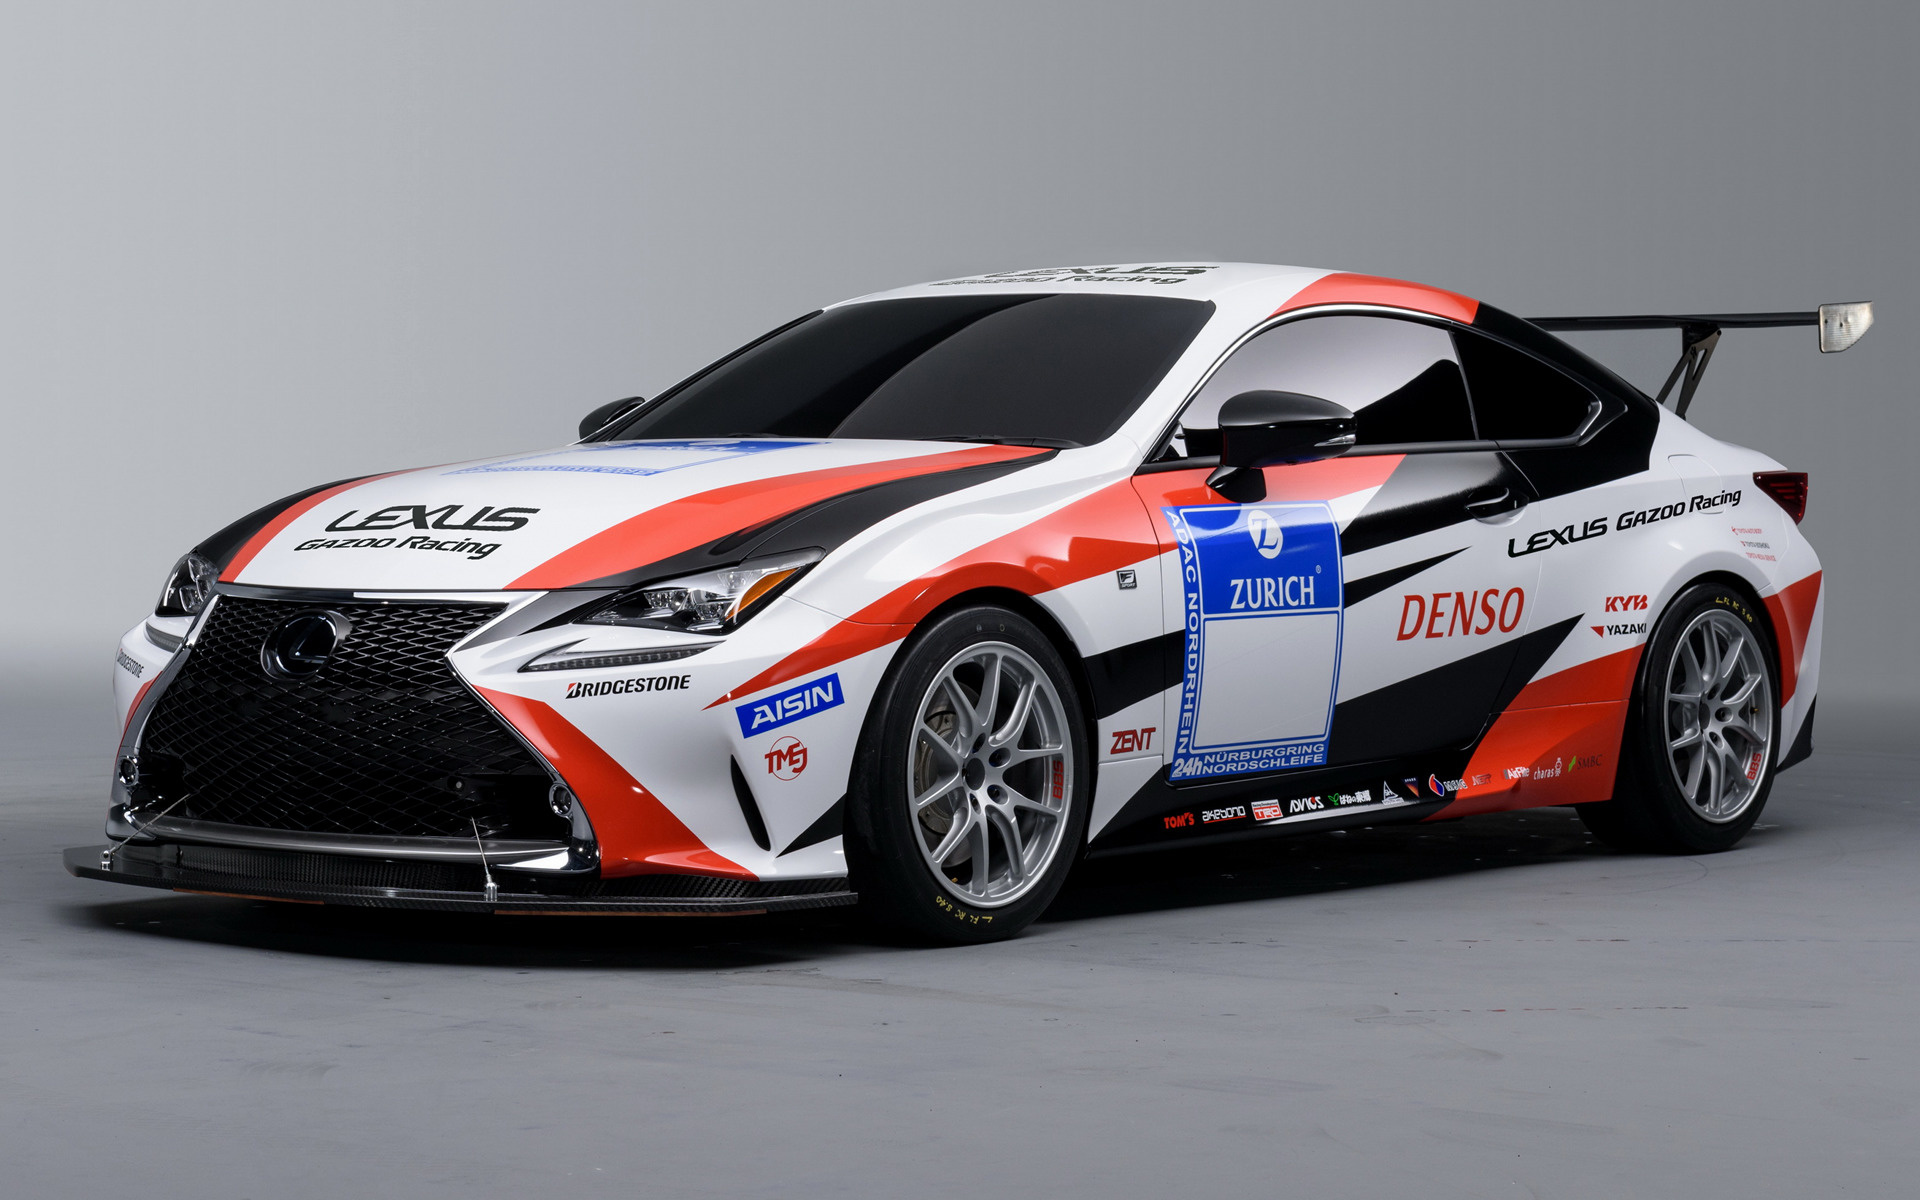 15 Lexus Rc By Gazoo Racing Wallpapers And Hd Images Car Pixel